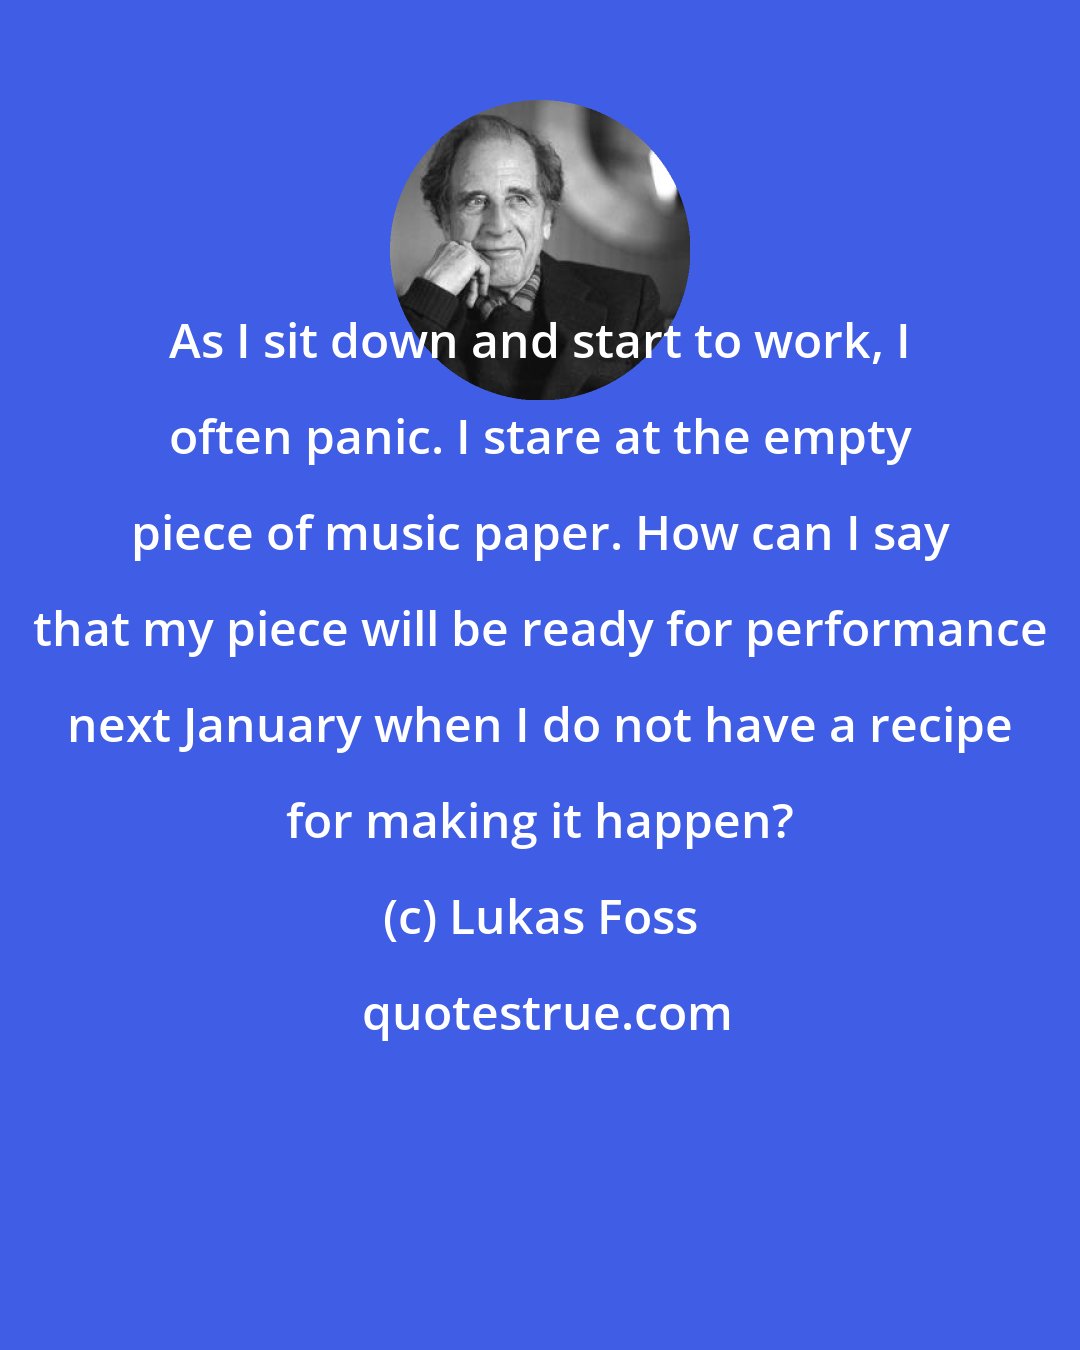 Lukas Foss: As I sit down and start to work, I often panic. I stare at the empty piece of music paper. How can I say that my piece will be ready for performance next January when I do not have a recipe for making it happen?